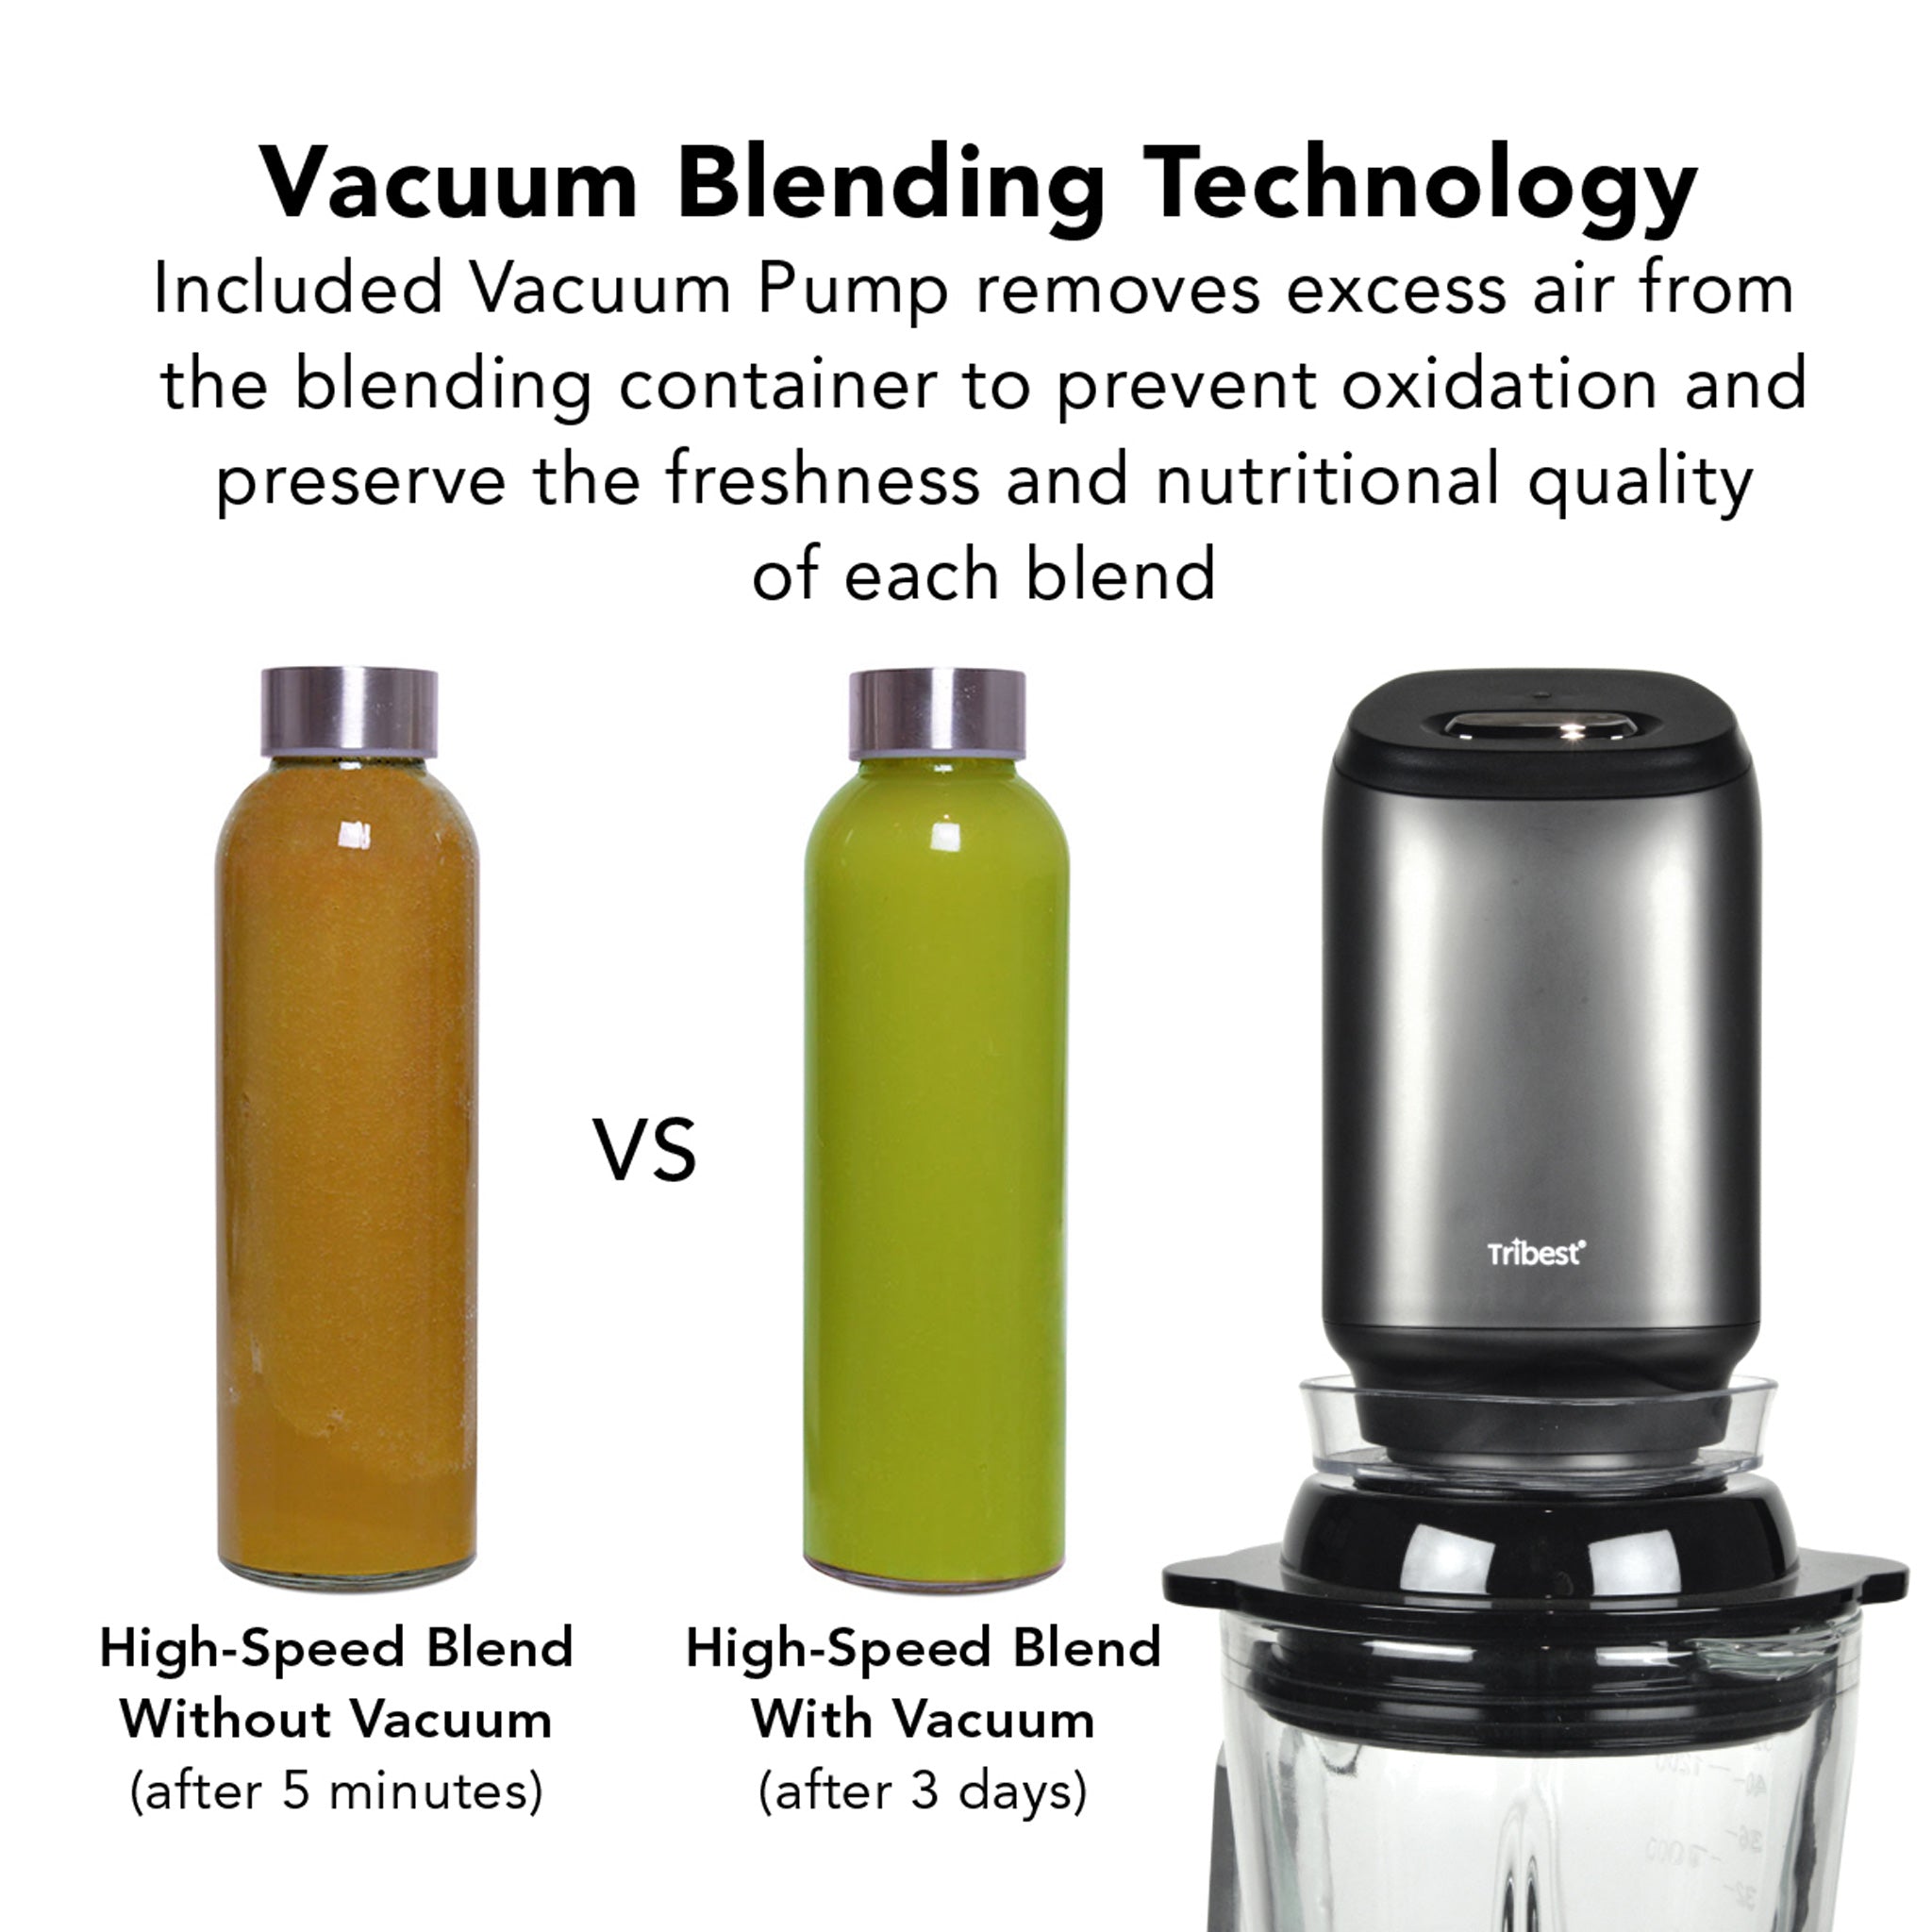 Glass Personal Blender with Vacuum Blender PBG-5001-A - Green Apples Comparison - Tribest